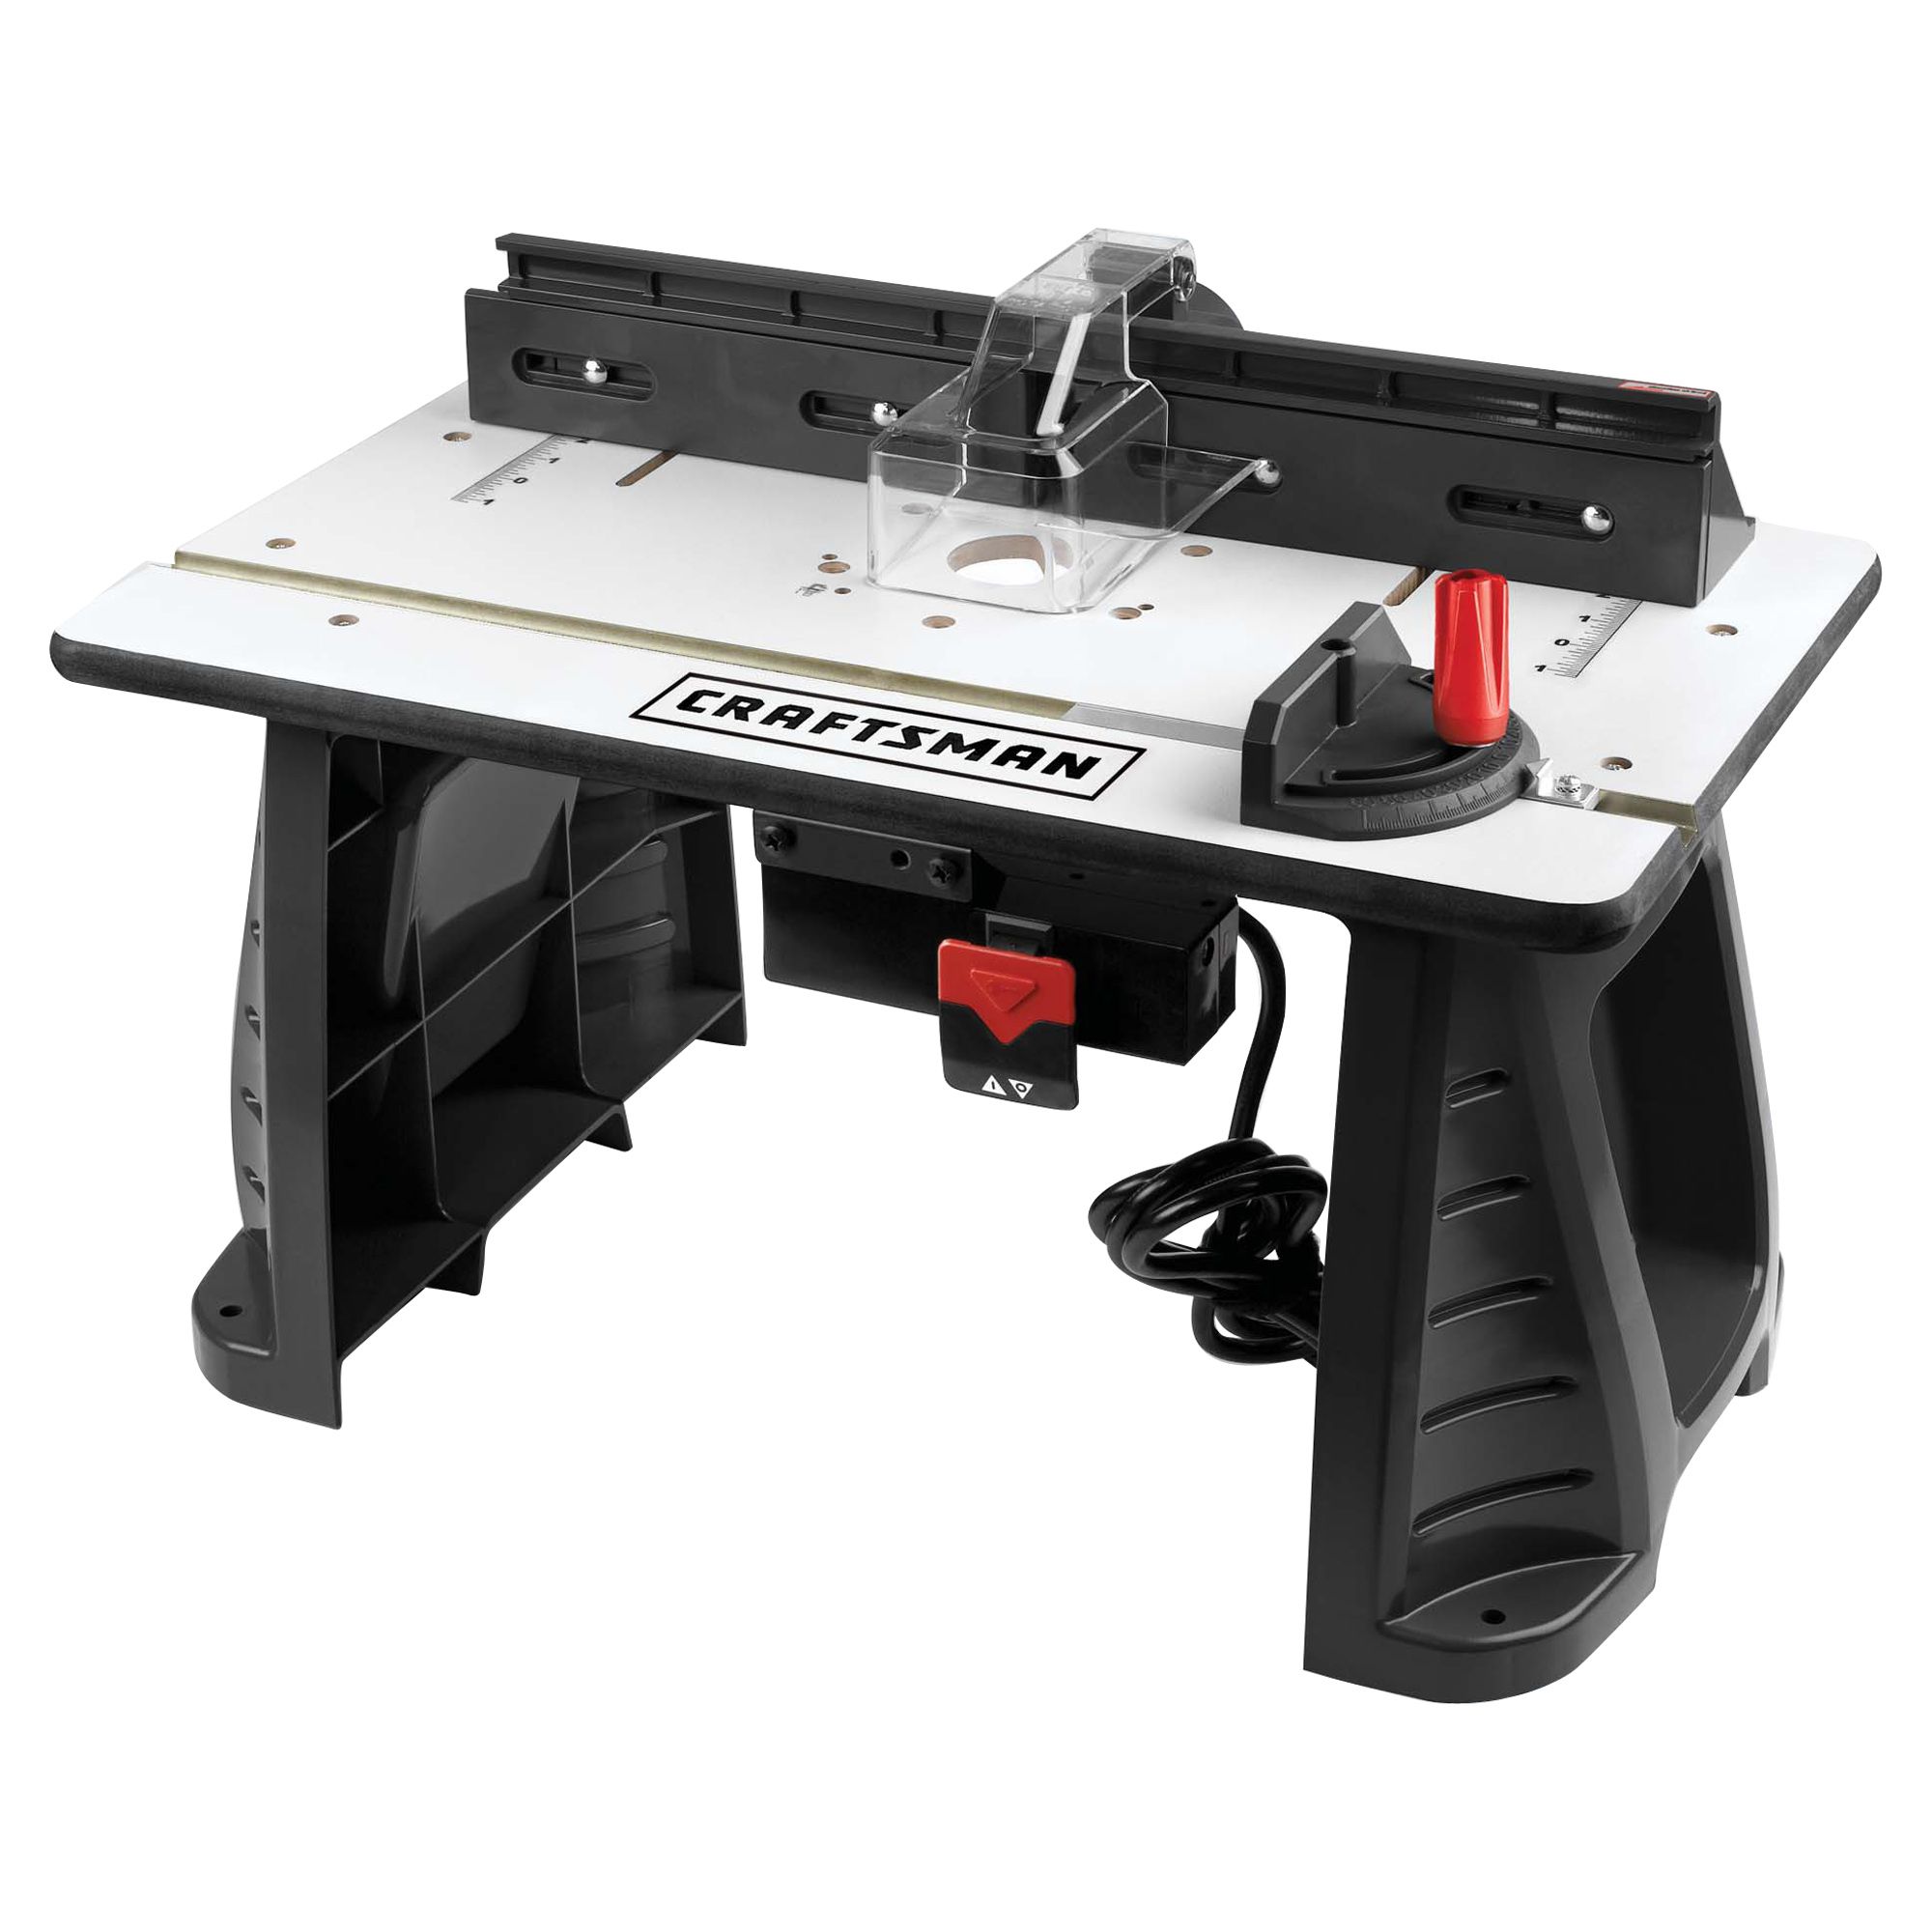 Craftsman Router Table Manual